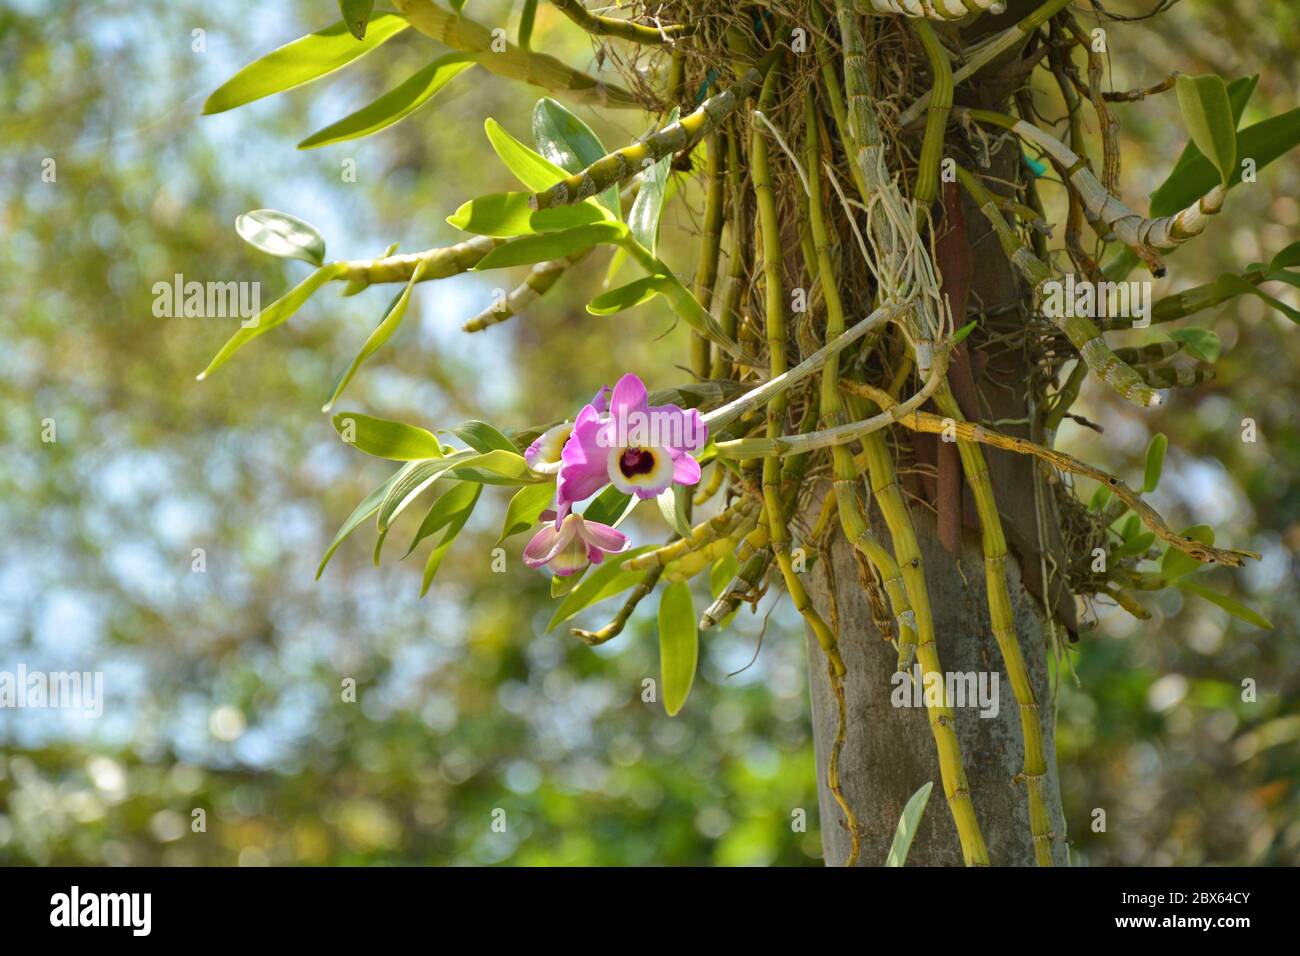 Dendrobium orchid flower growing on the tree Stock Photo